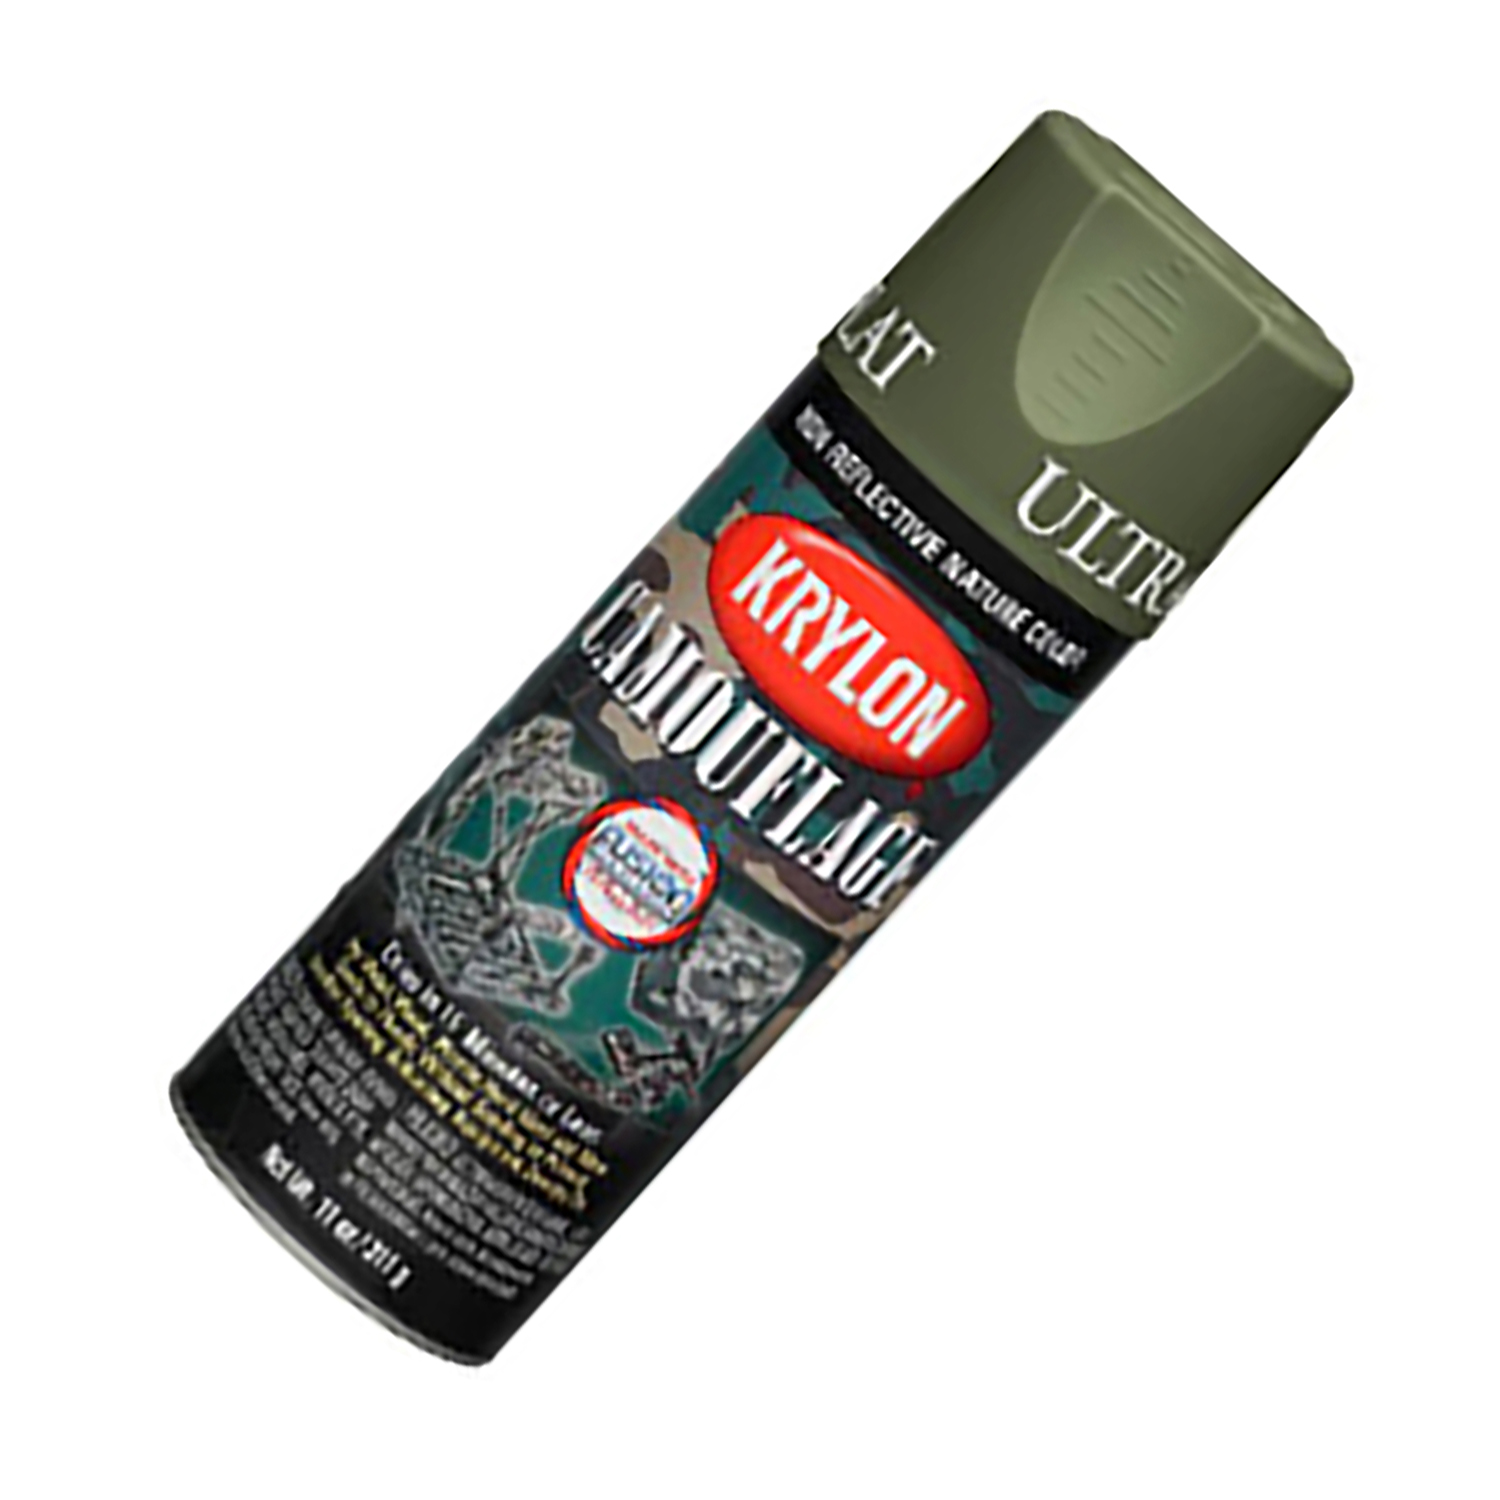 Krylon Camouflage Paint At Firesupport  Popular Airsoft: Welcome To The  Airsoft World